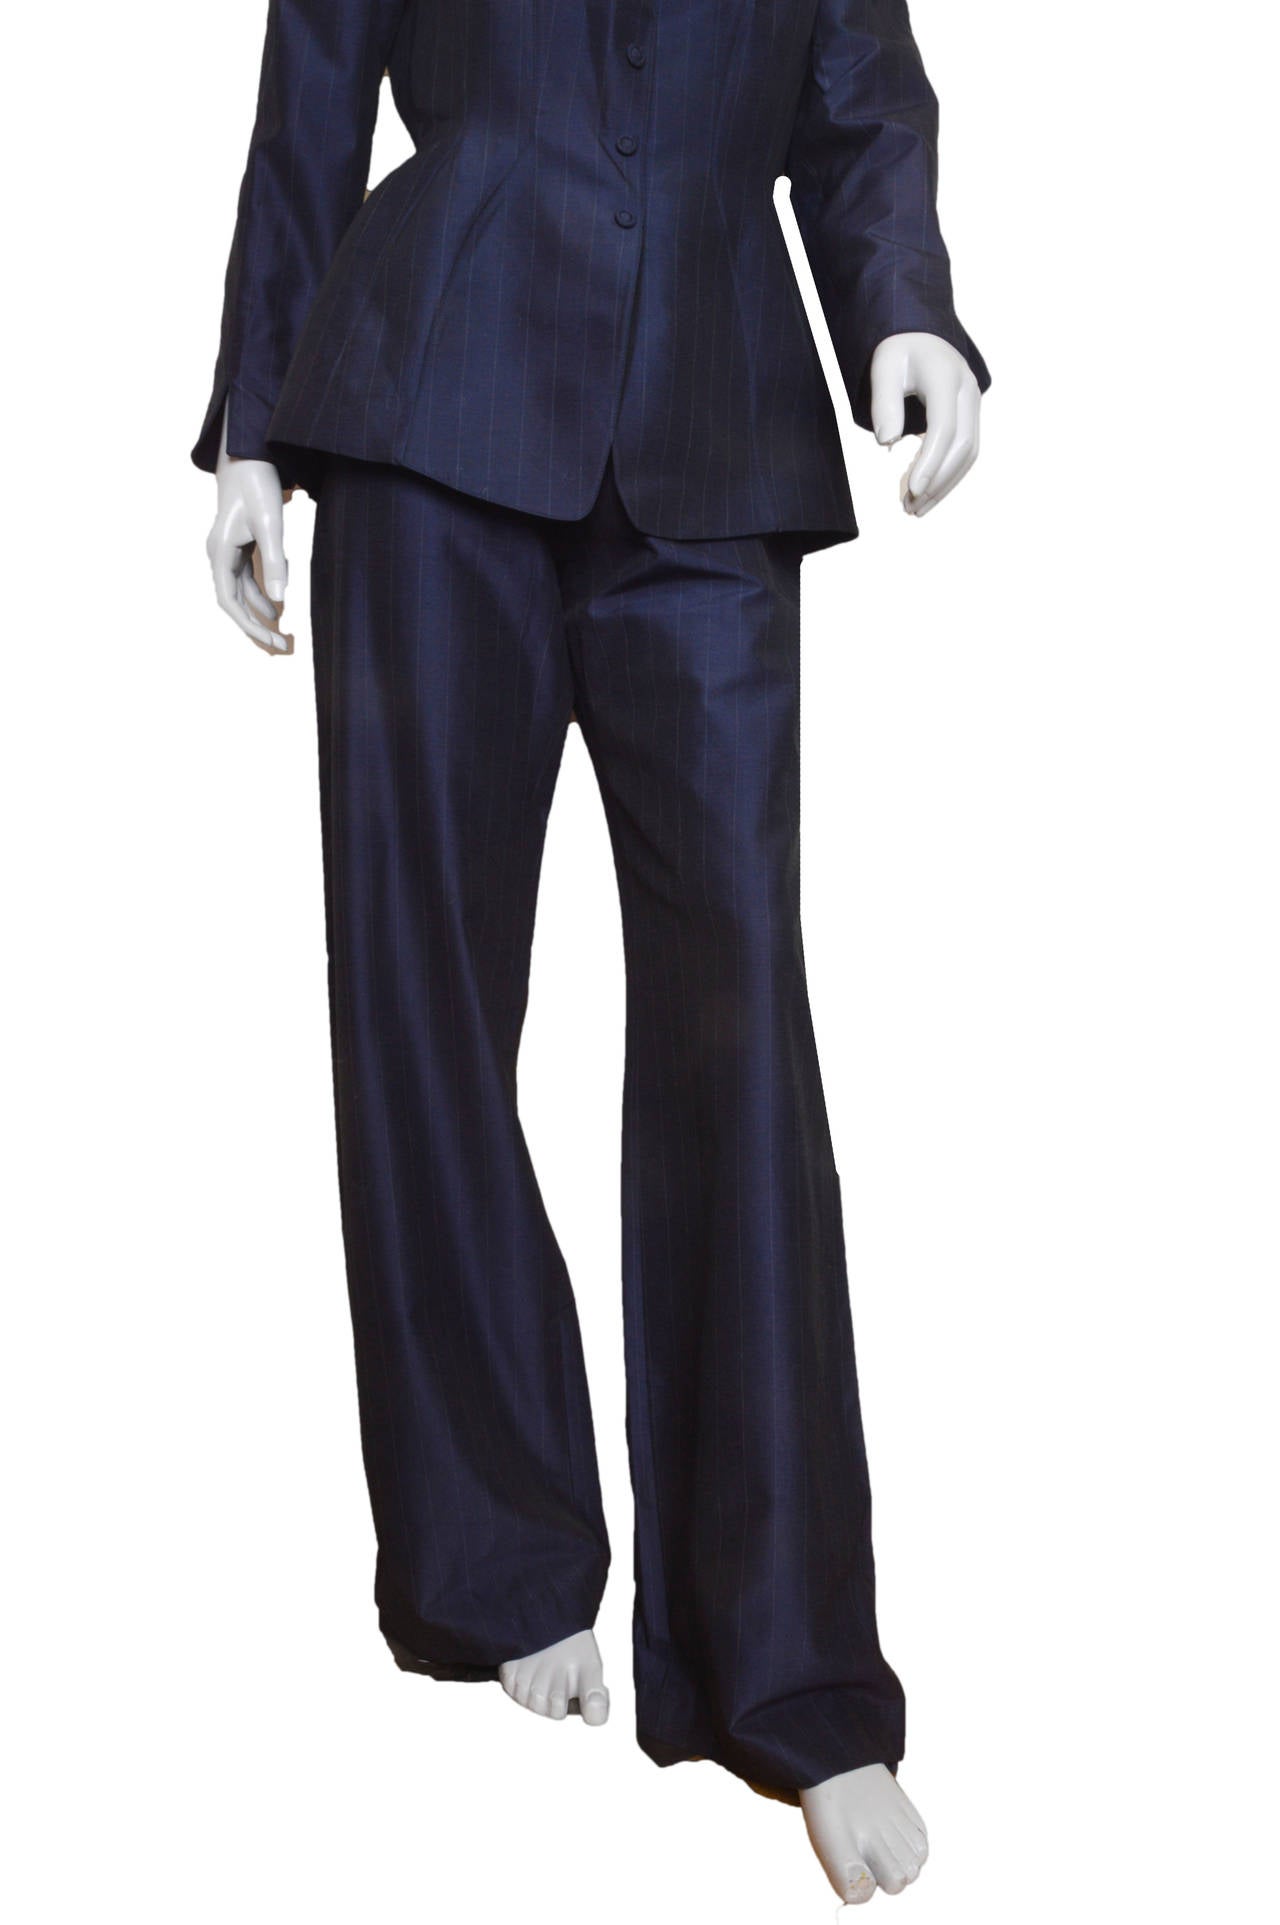 Thierry Mugler Bib Navy Pinstripe Avant Garde Pant Suit In Excellent Condition In Oakland, CA